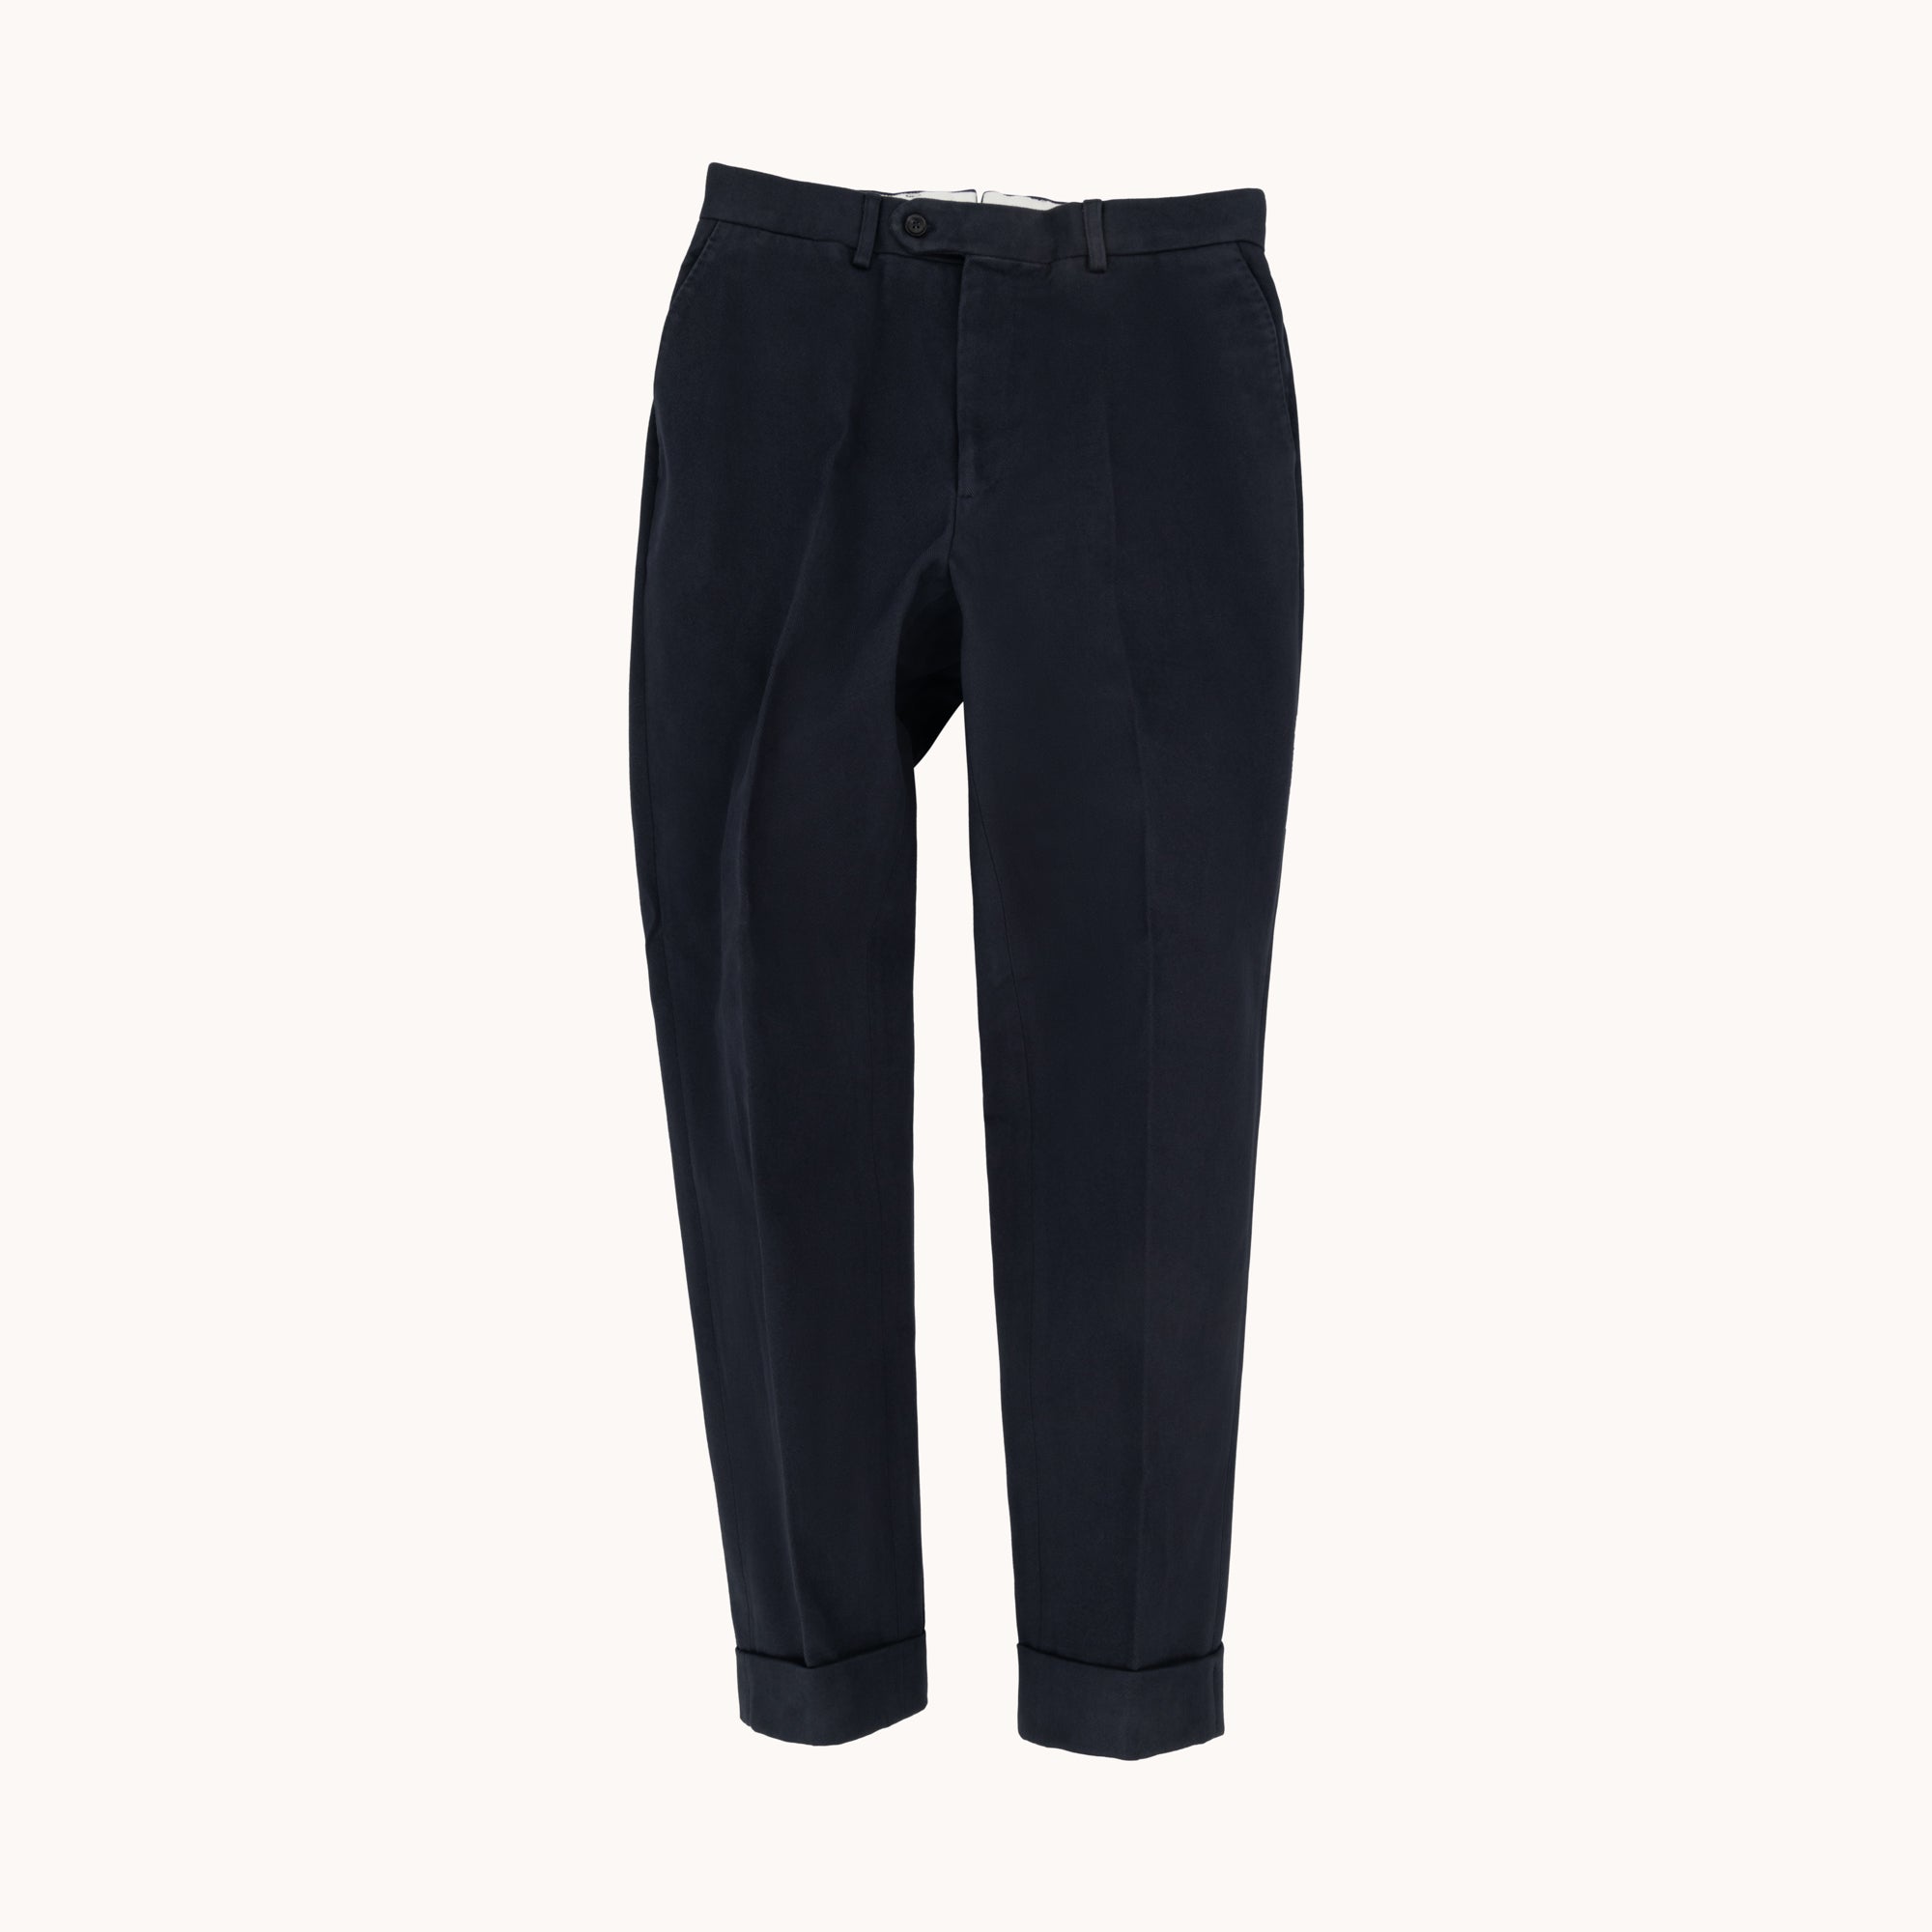 Garment Washed Flat Front Trouser - Navy Cotton Drill